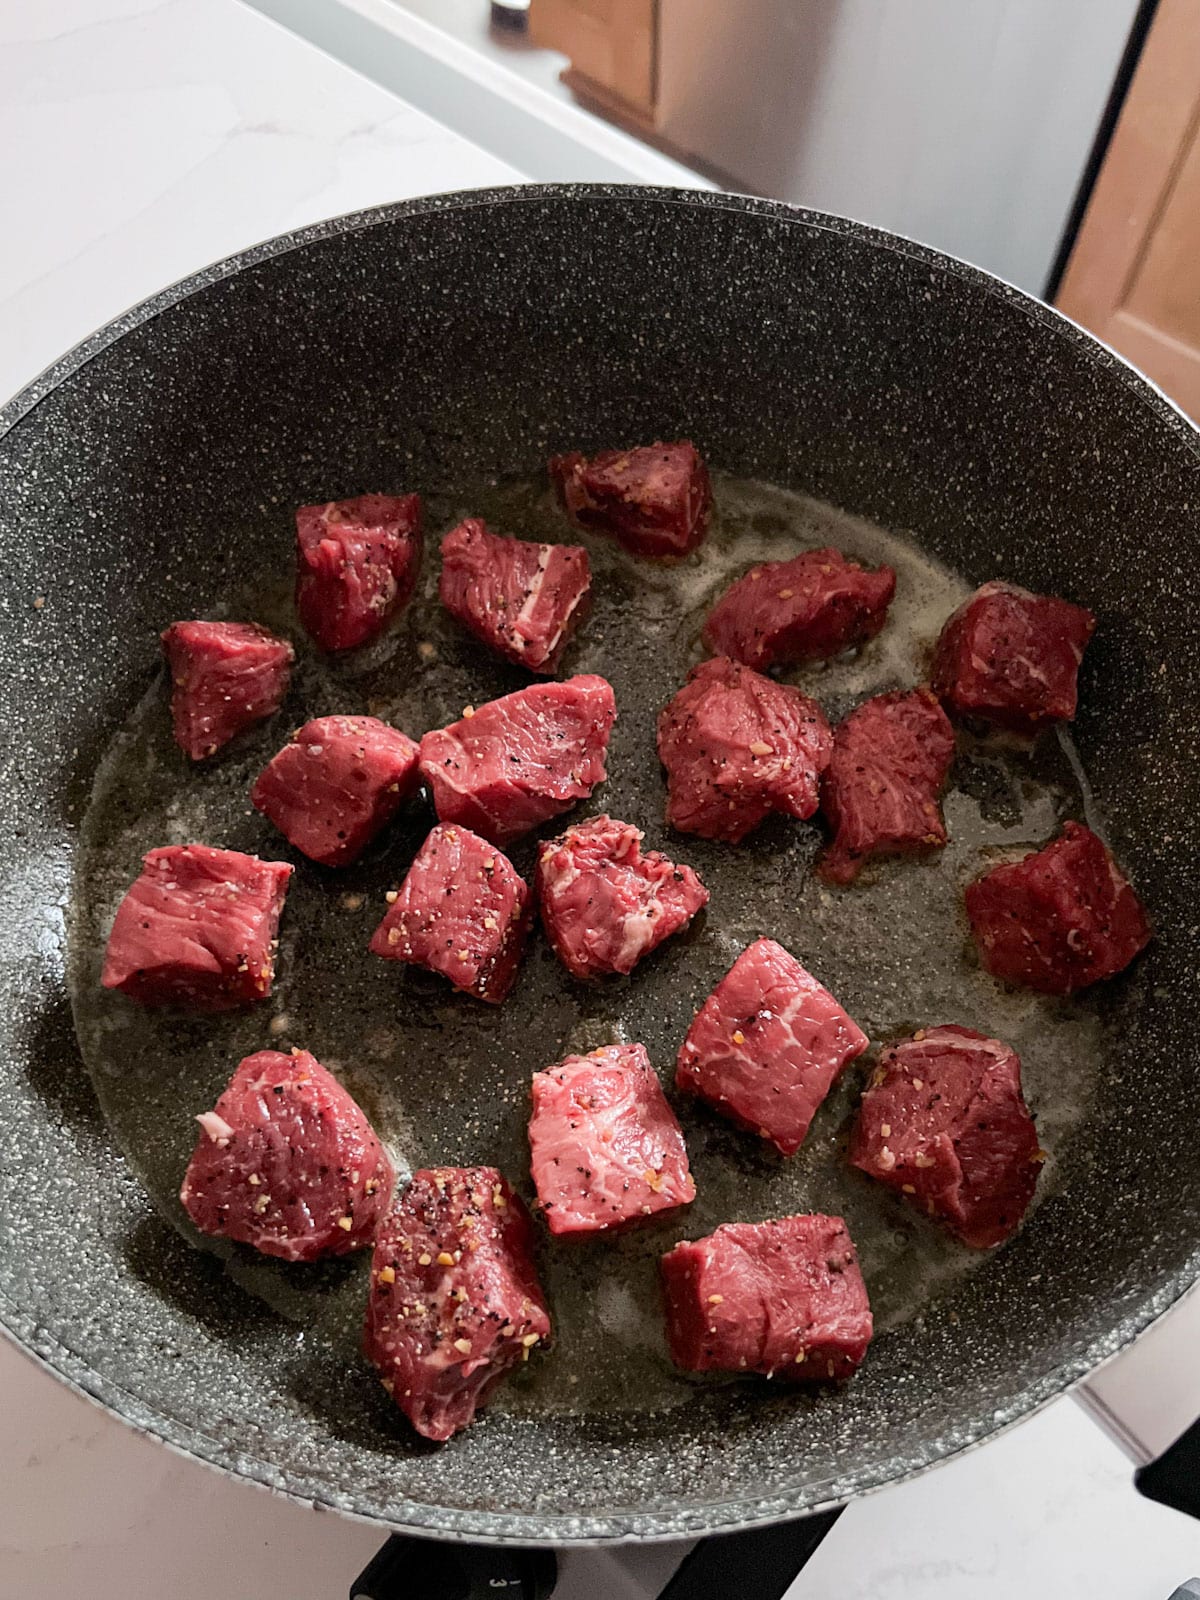 Raw beef chunks added to the melted butter in the skillet.